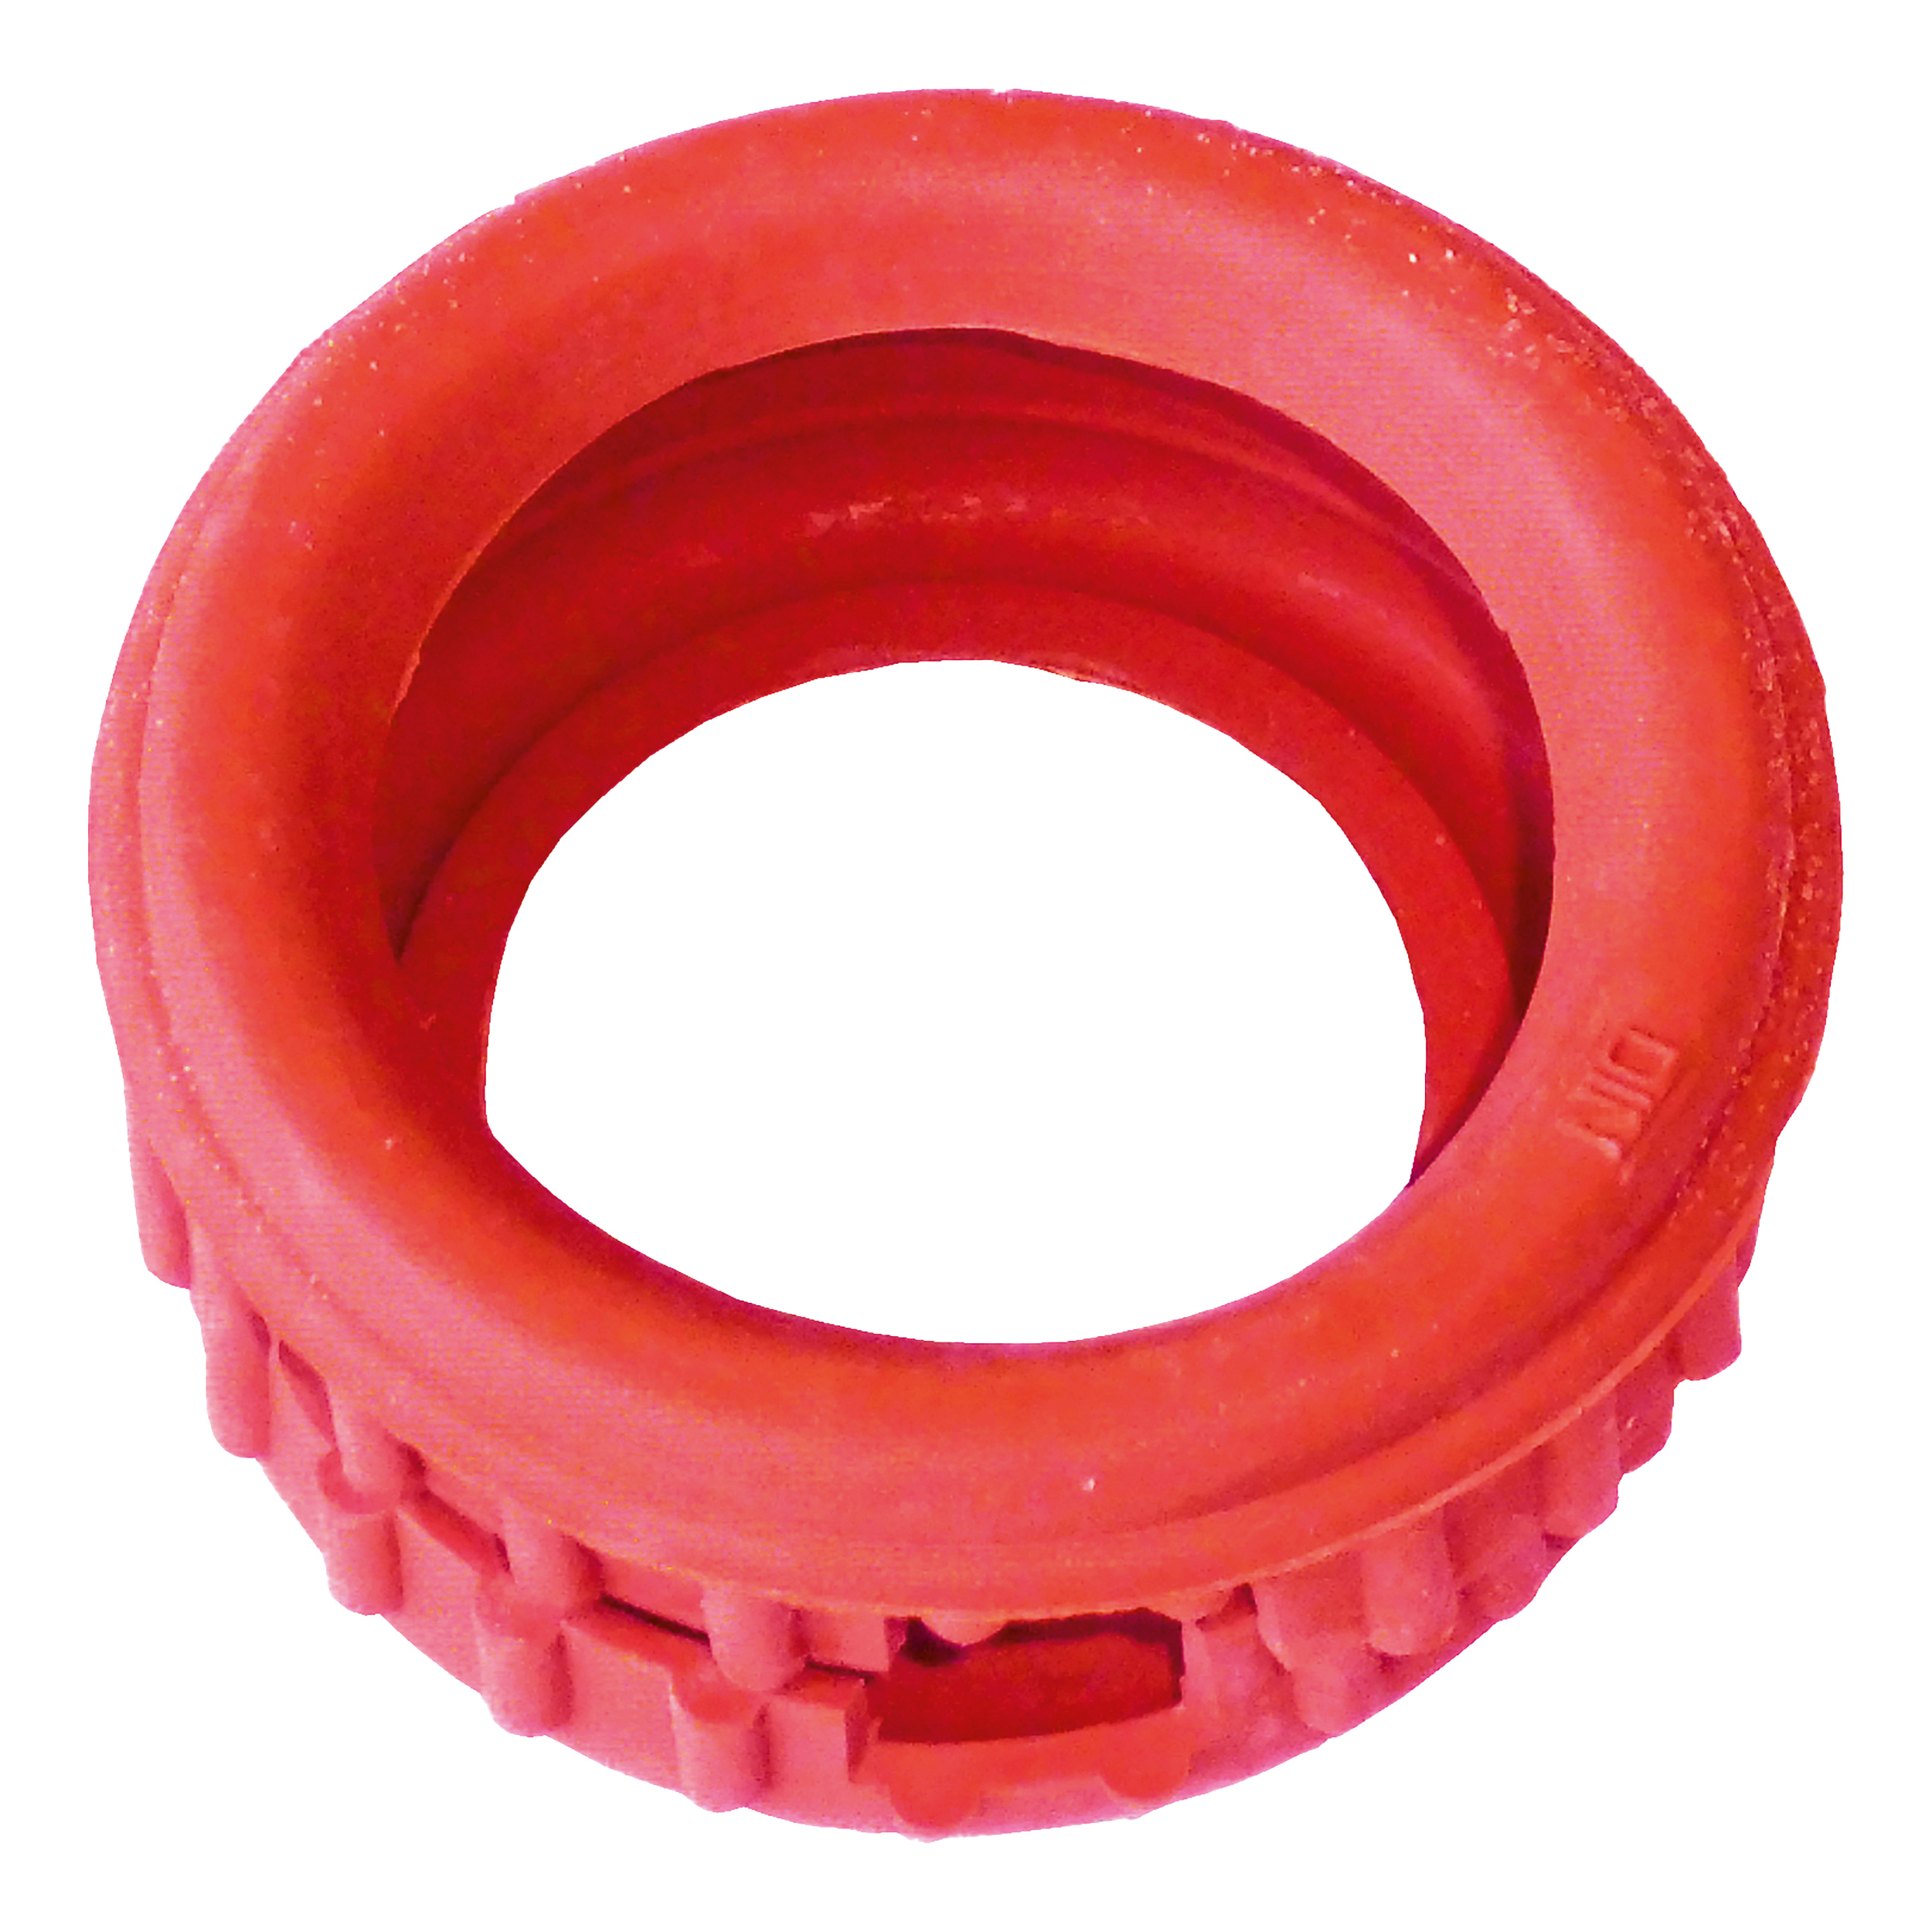 Protective rubber cap for safety gauges